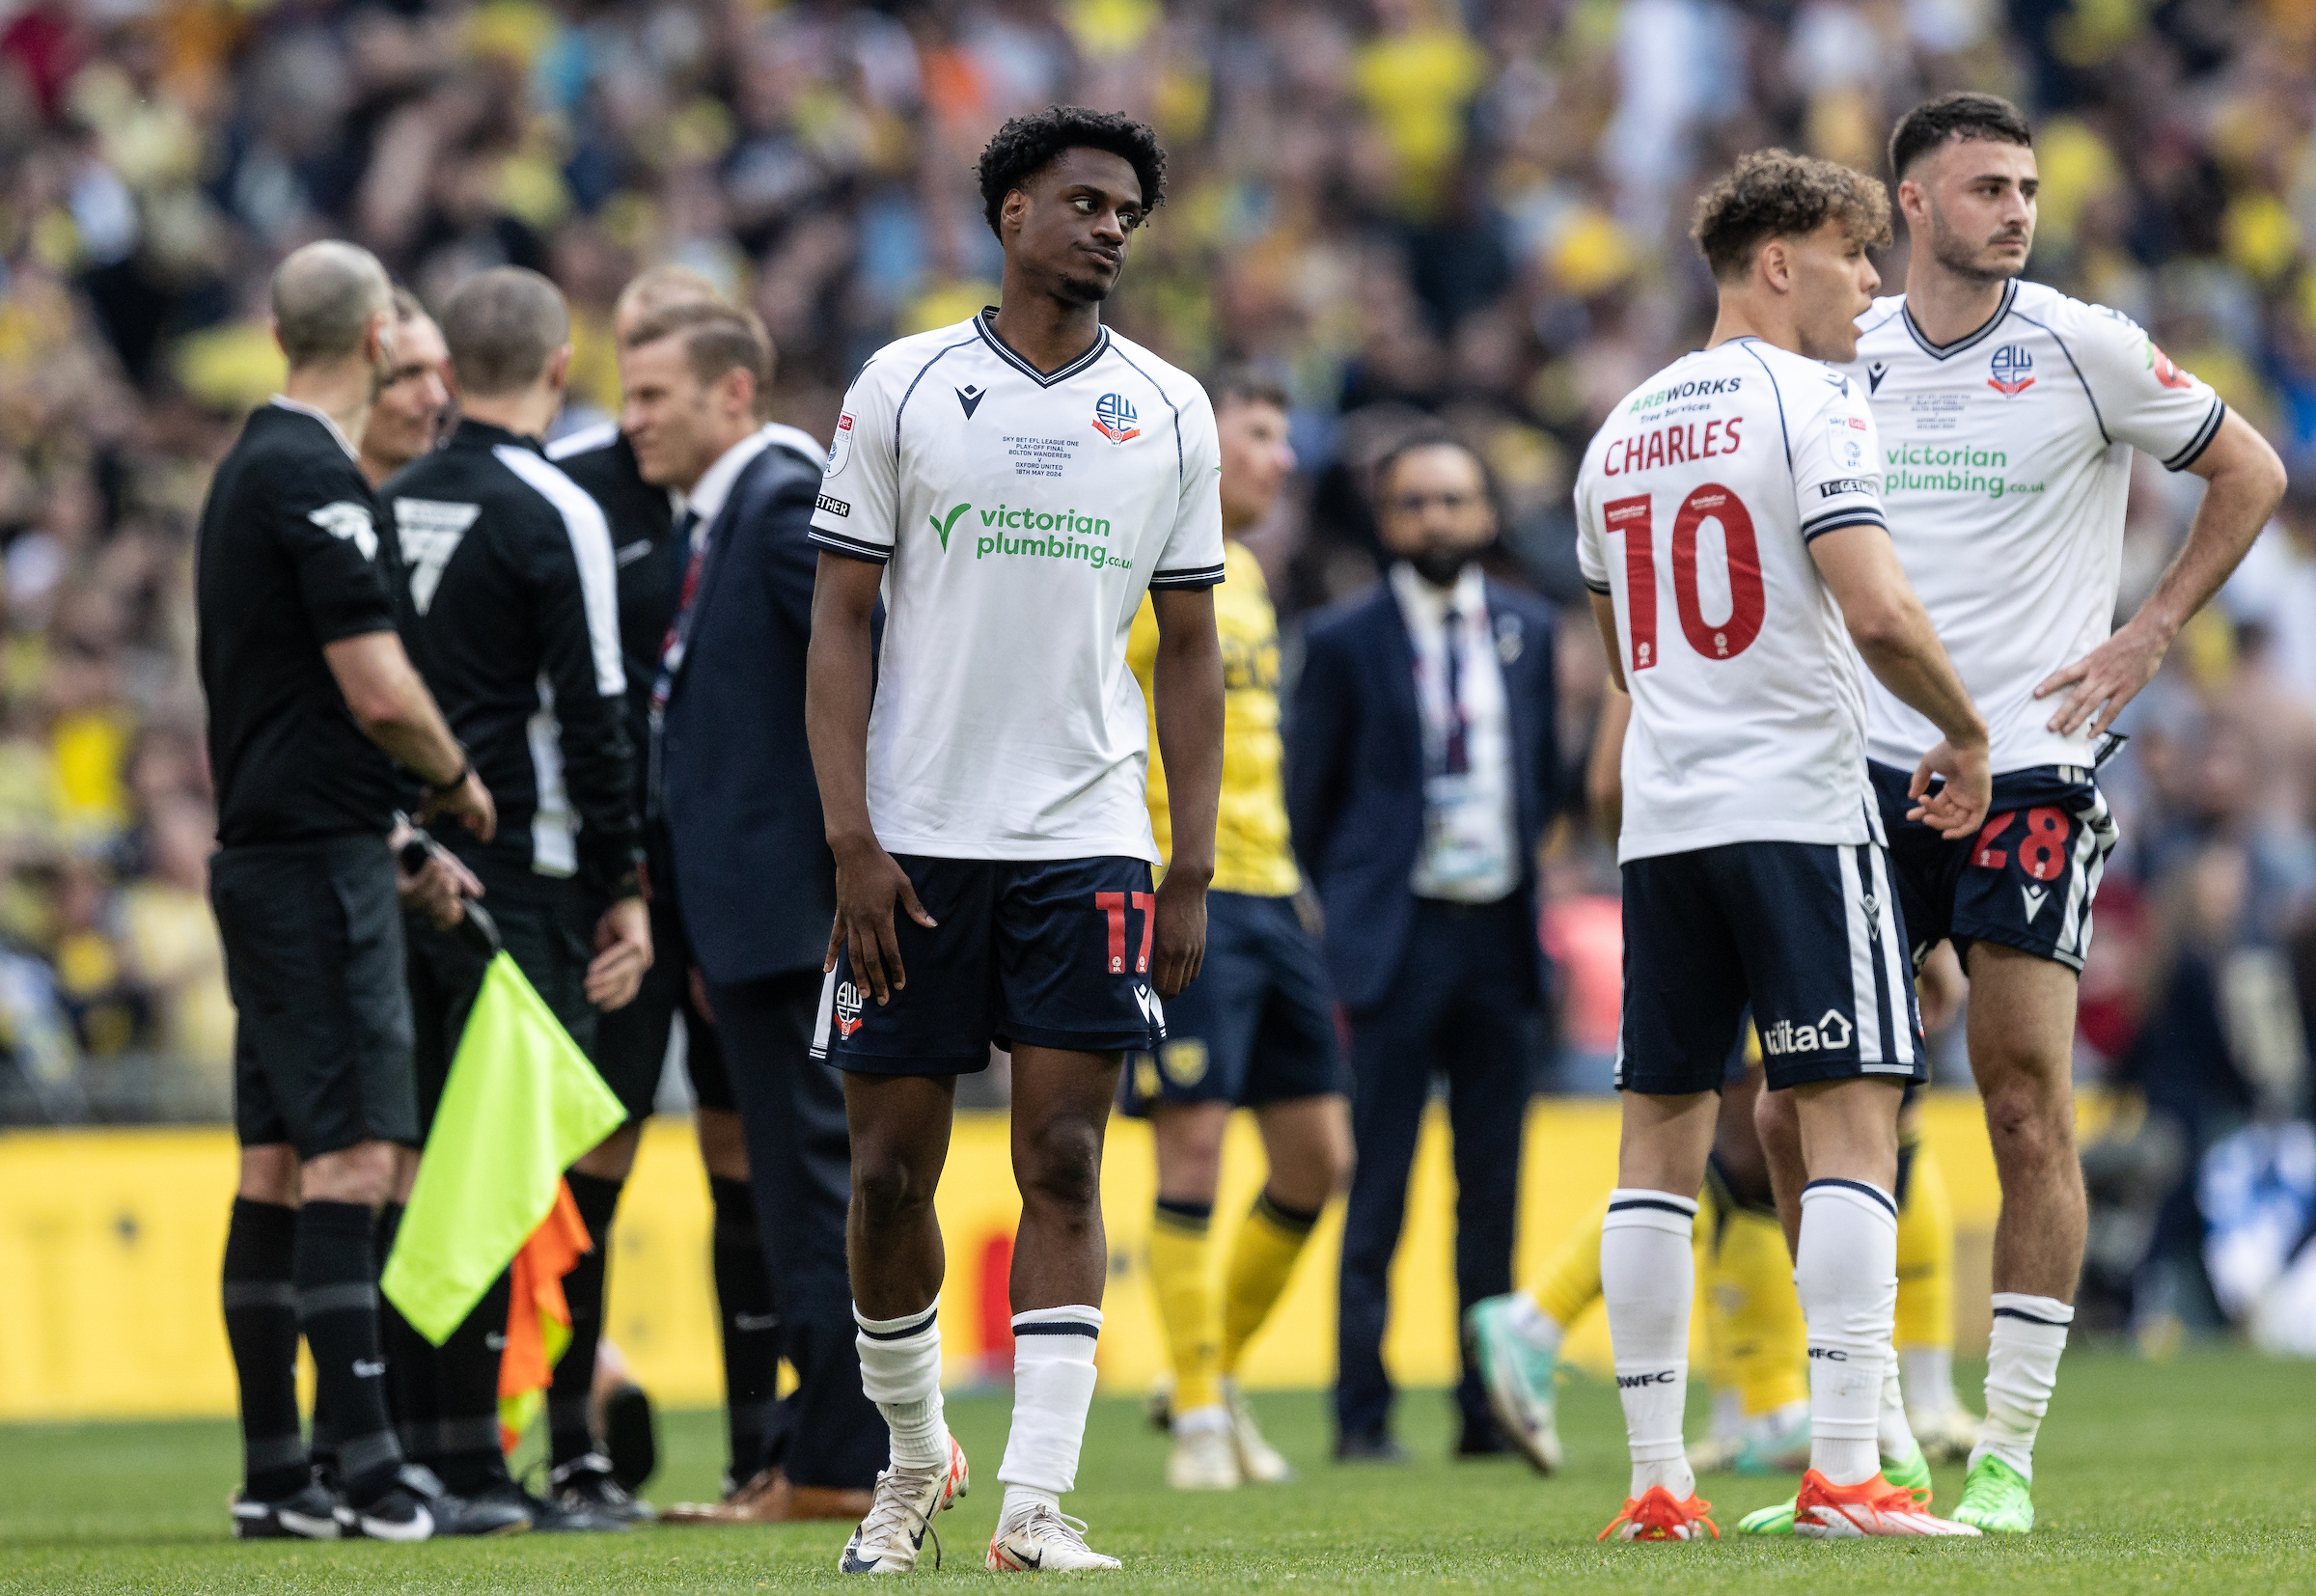 Bolton Wanderers: Aaron Collins on Oxford defeat at Wembley